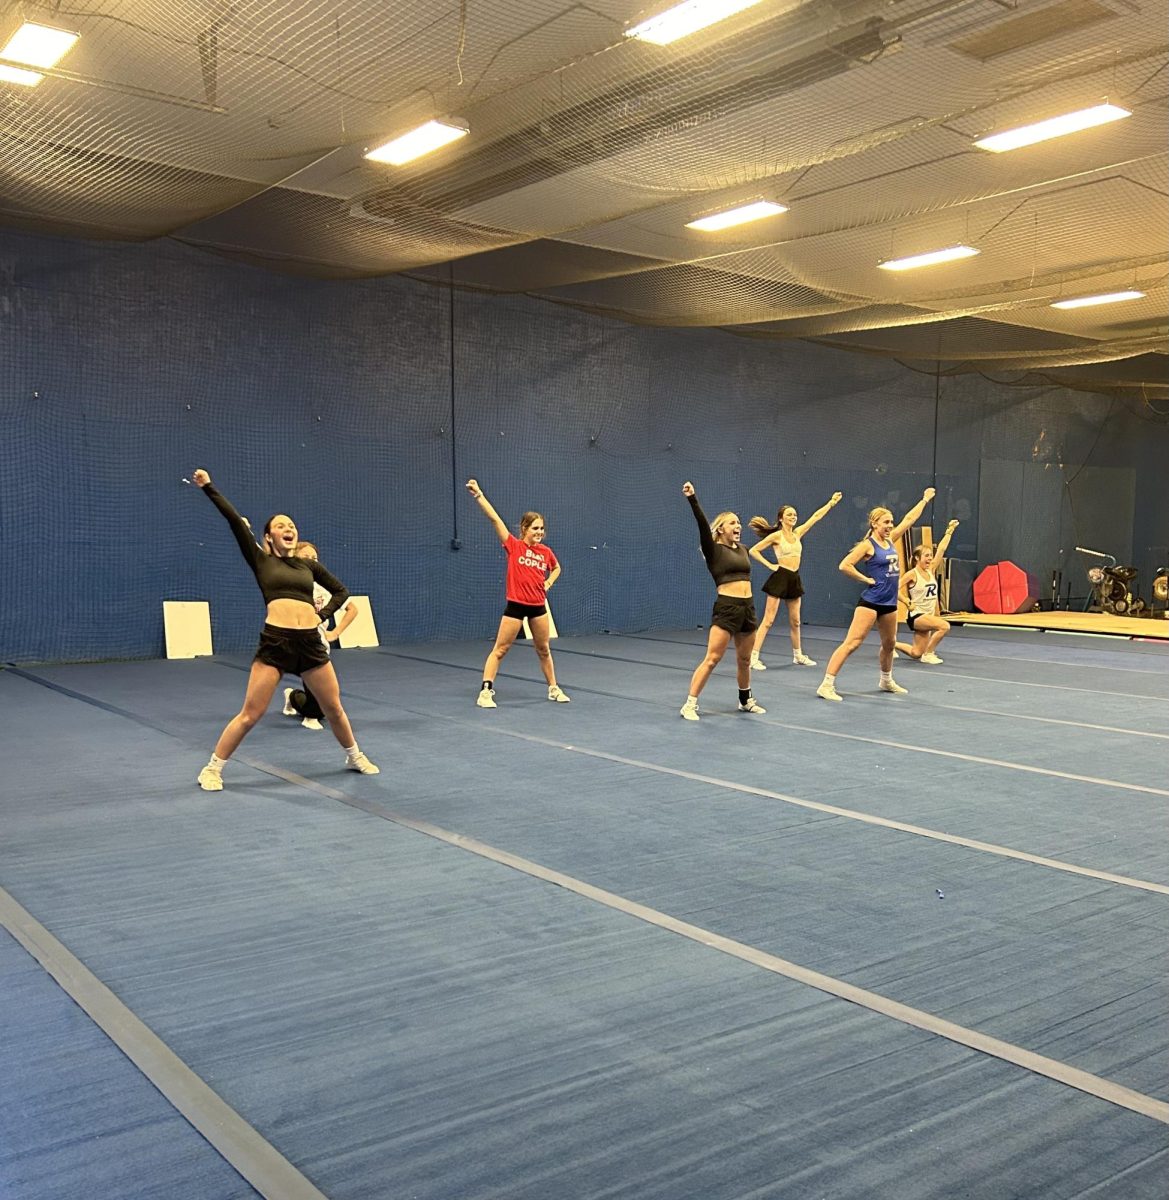 The competition squad practices their routine in preparation for the next competition. 